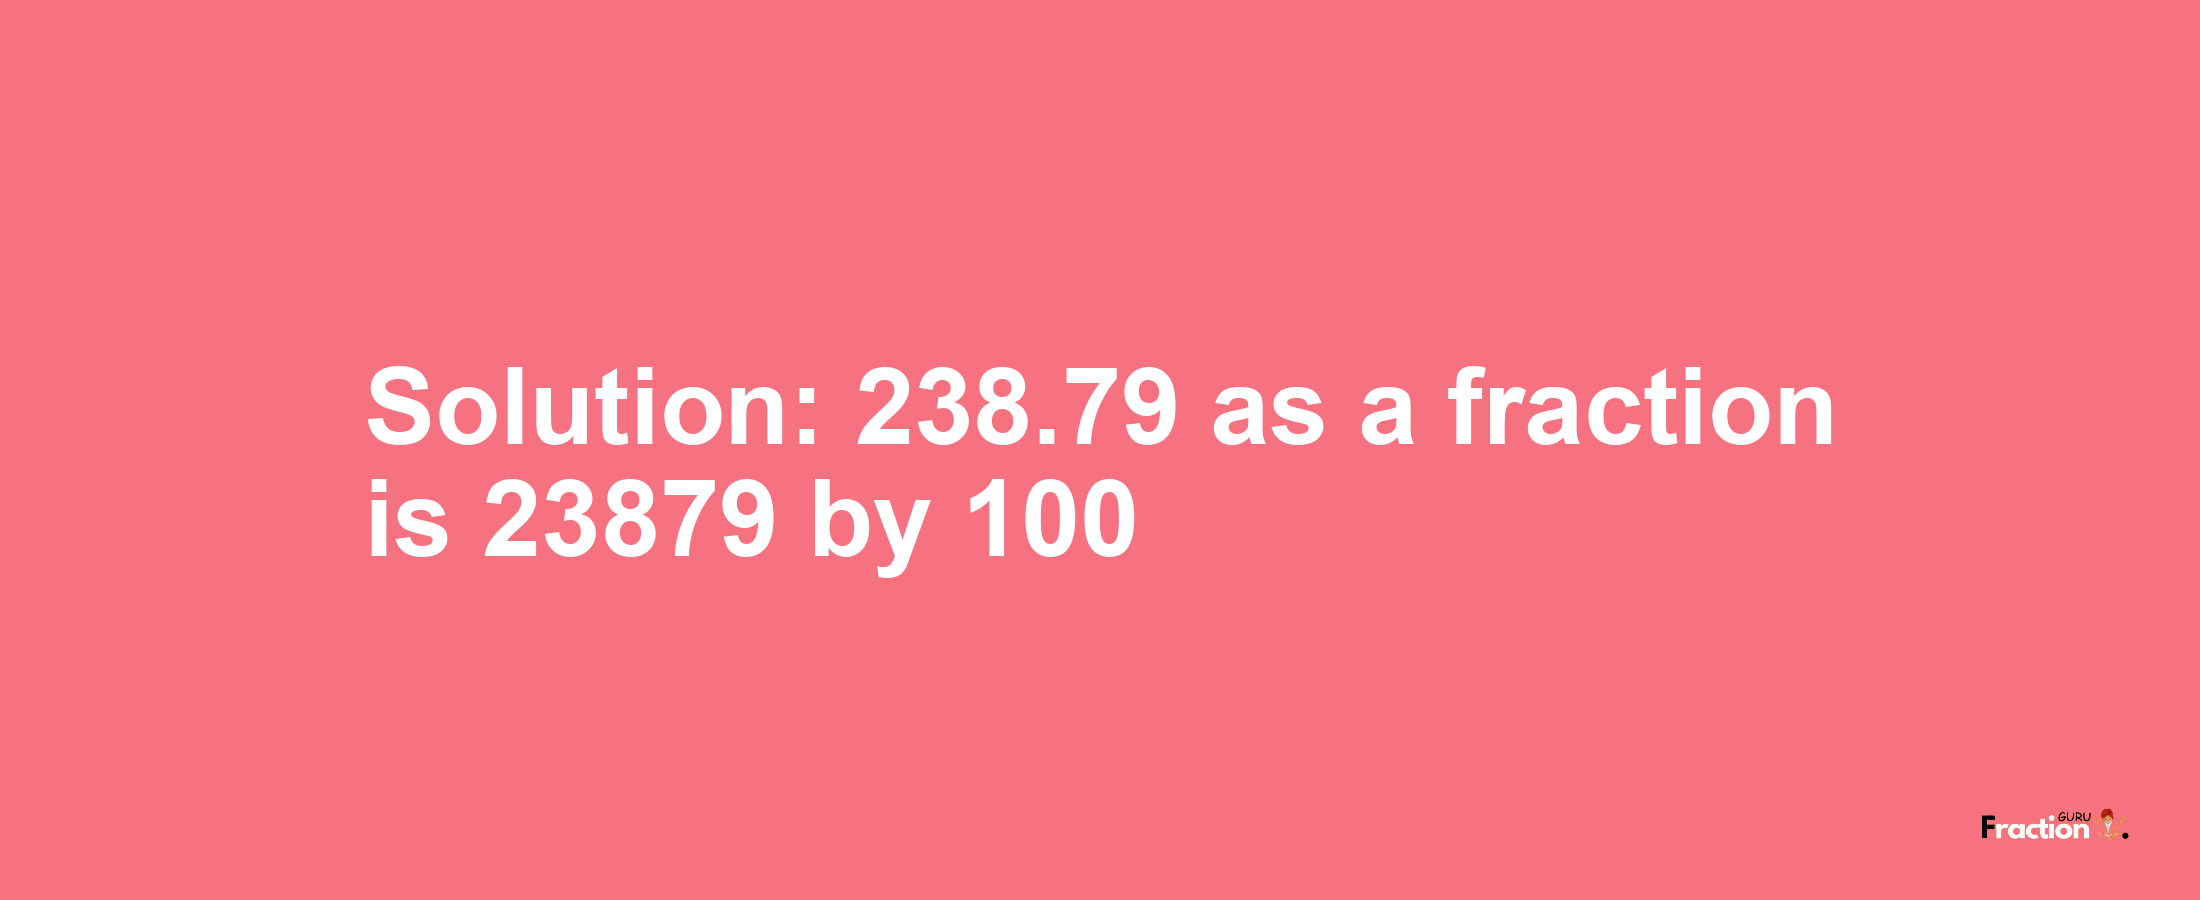 Solution:238.79 as a fraction is 23879/100